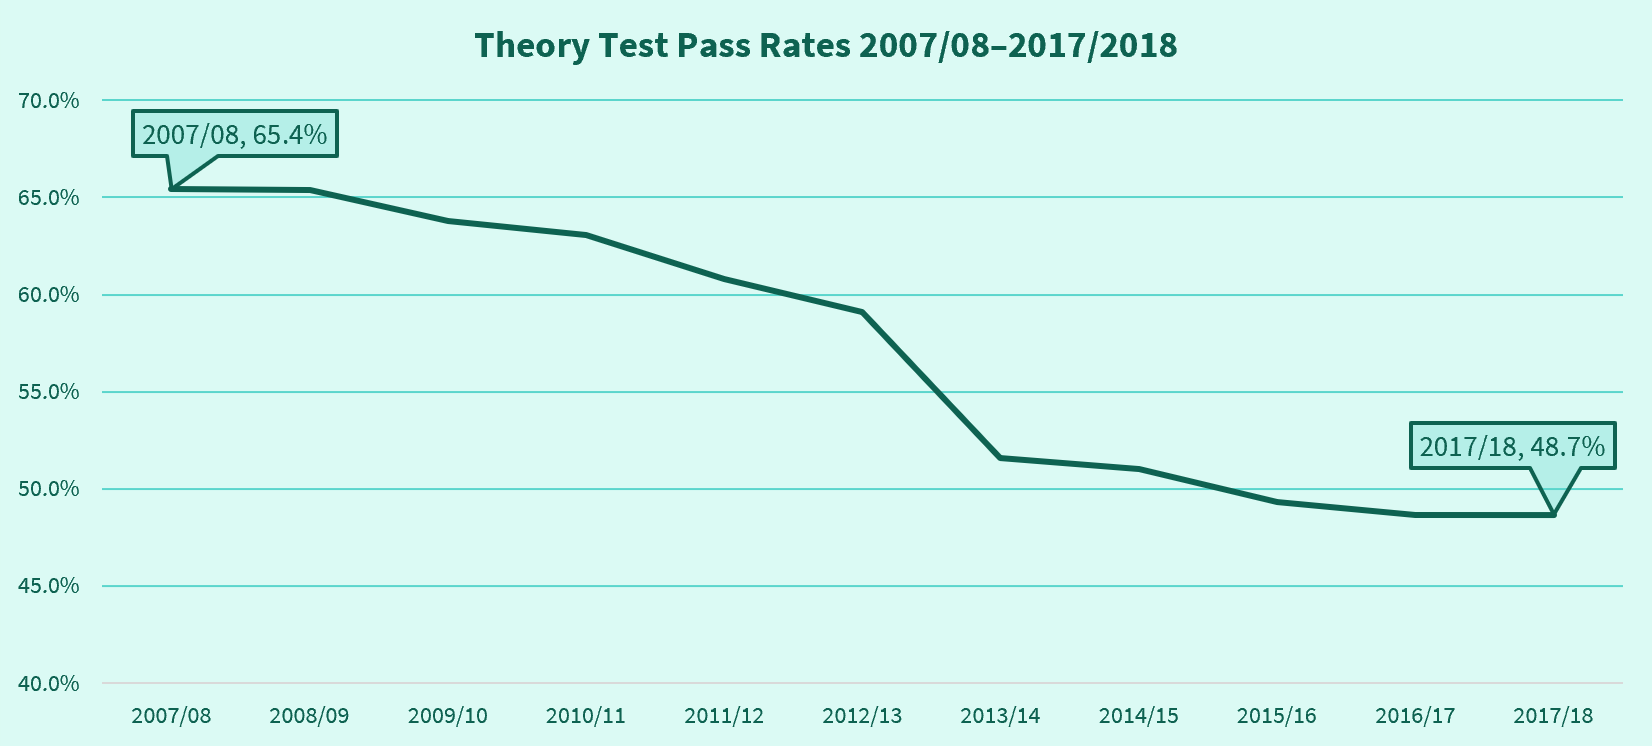 A chart showing the theory test pass rates from 2007/08 to 2017/18.